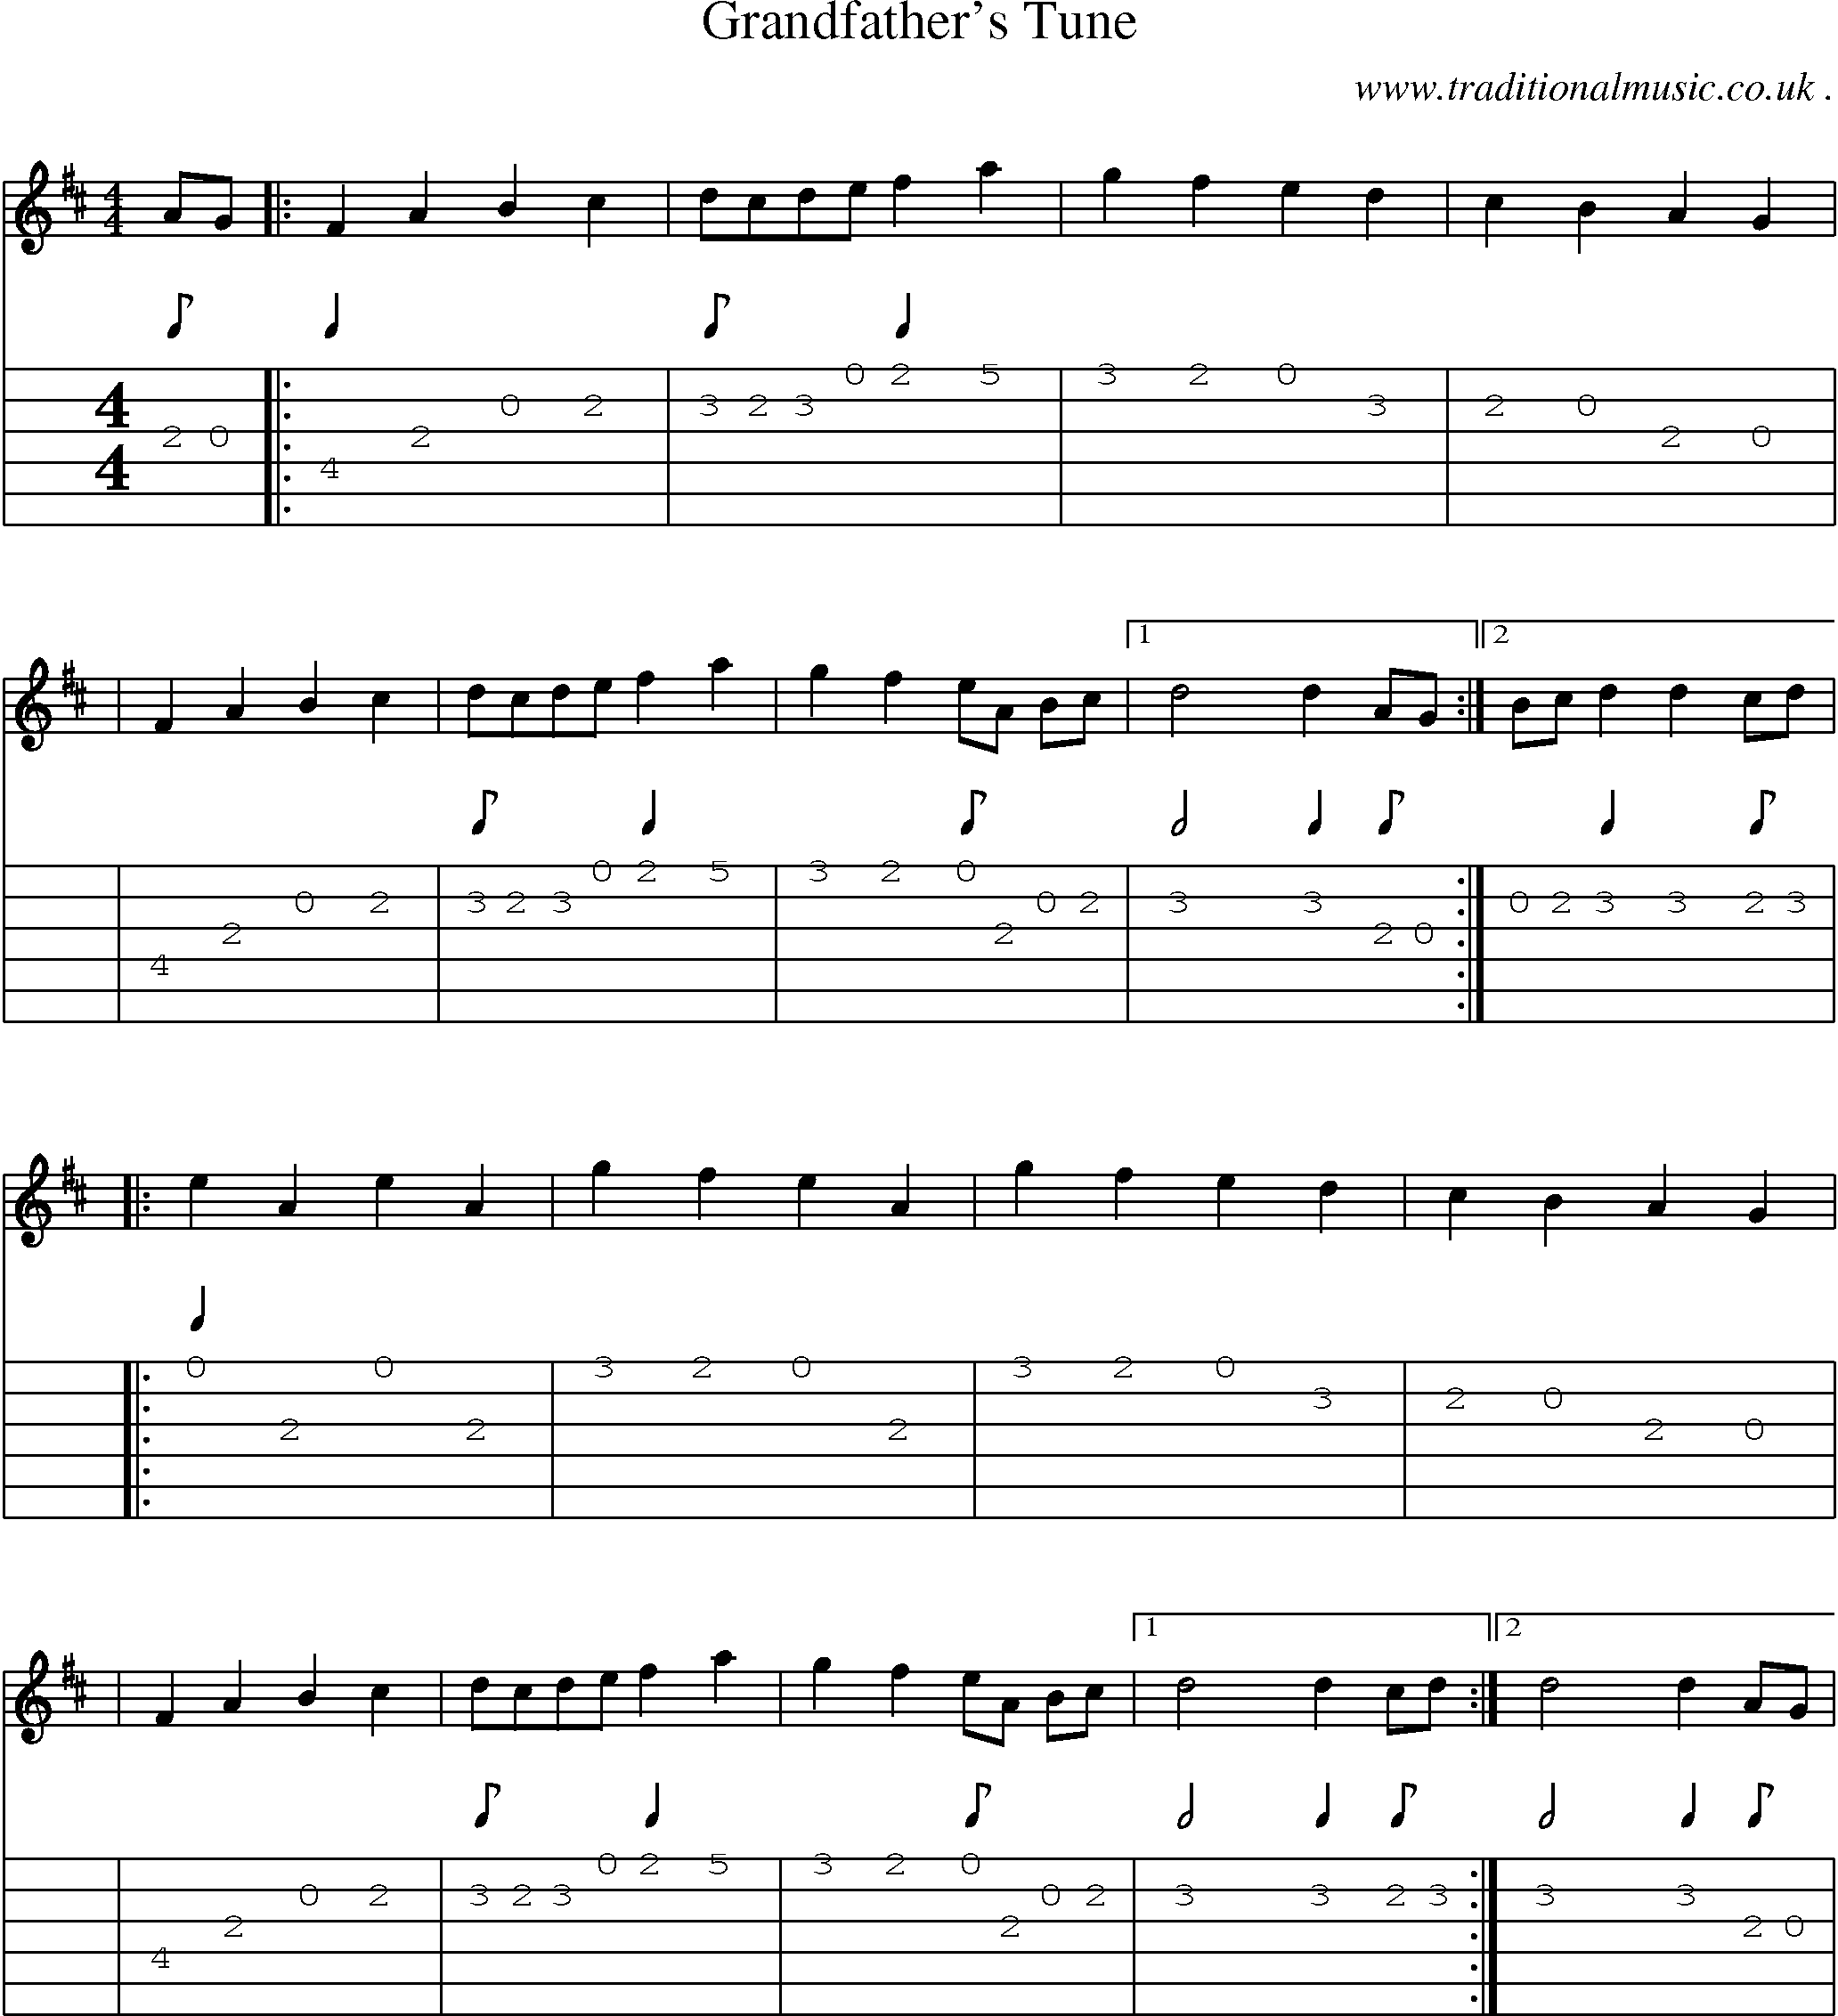 Sheet-Music and Guitar Tabs for Grandfathers Tune